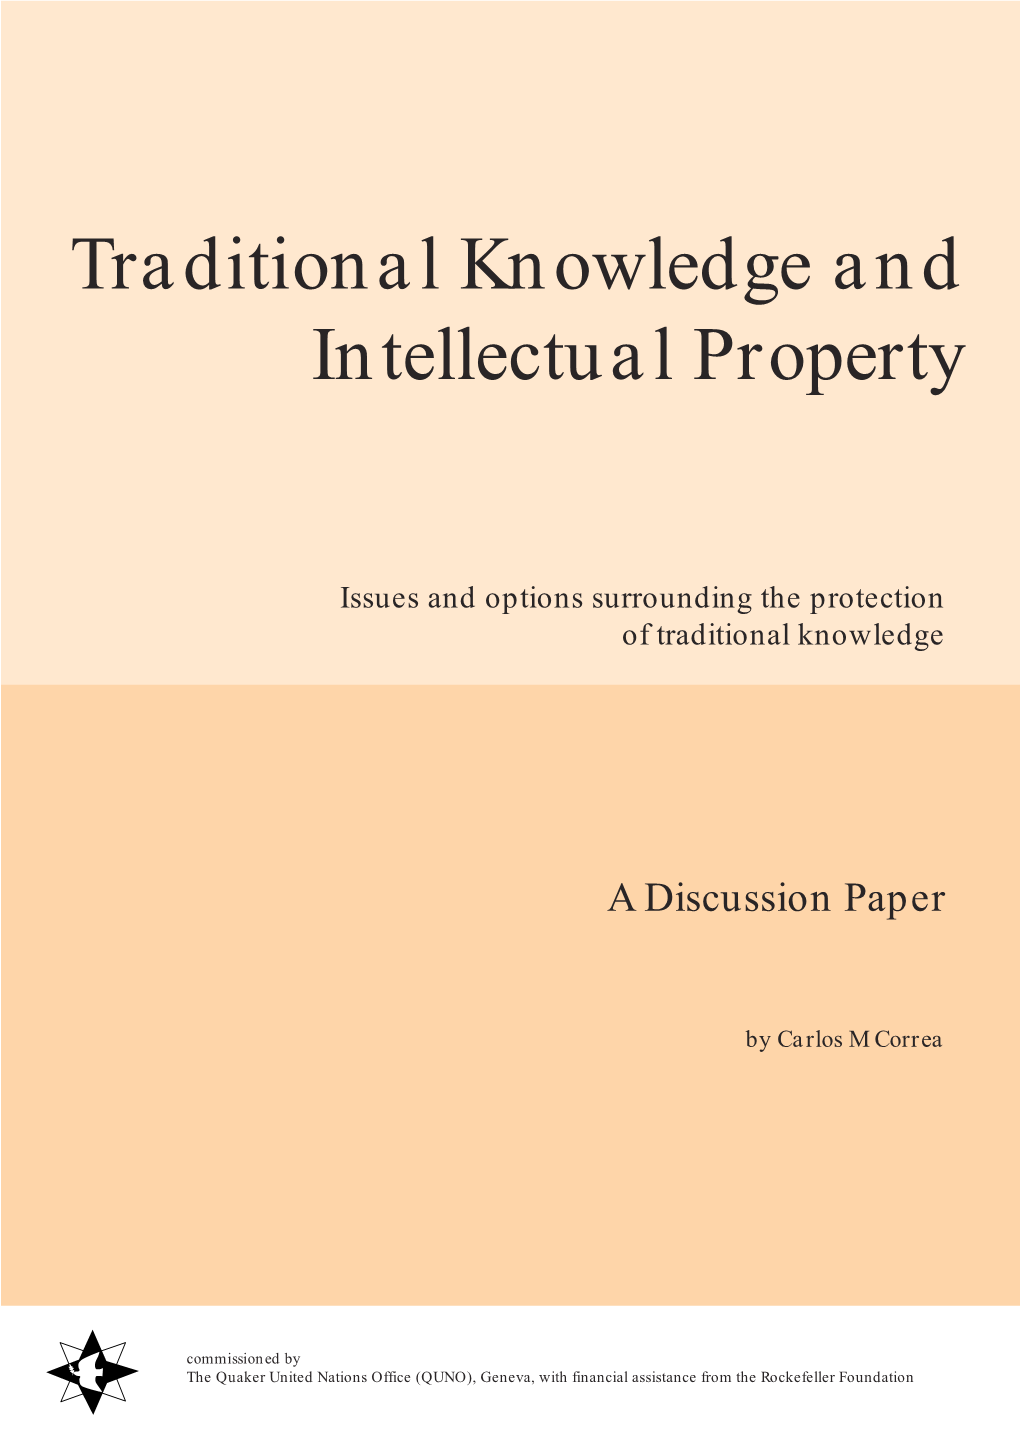 Traditional Knowledge and Intellectual Property